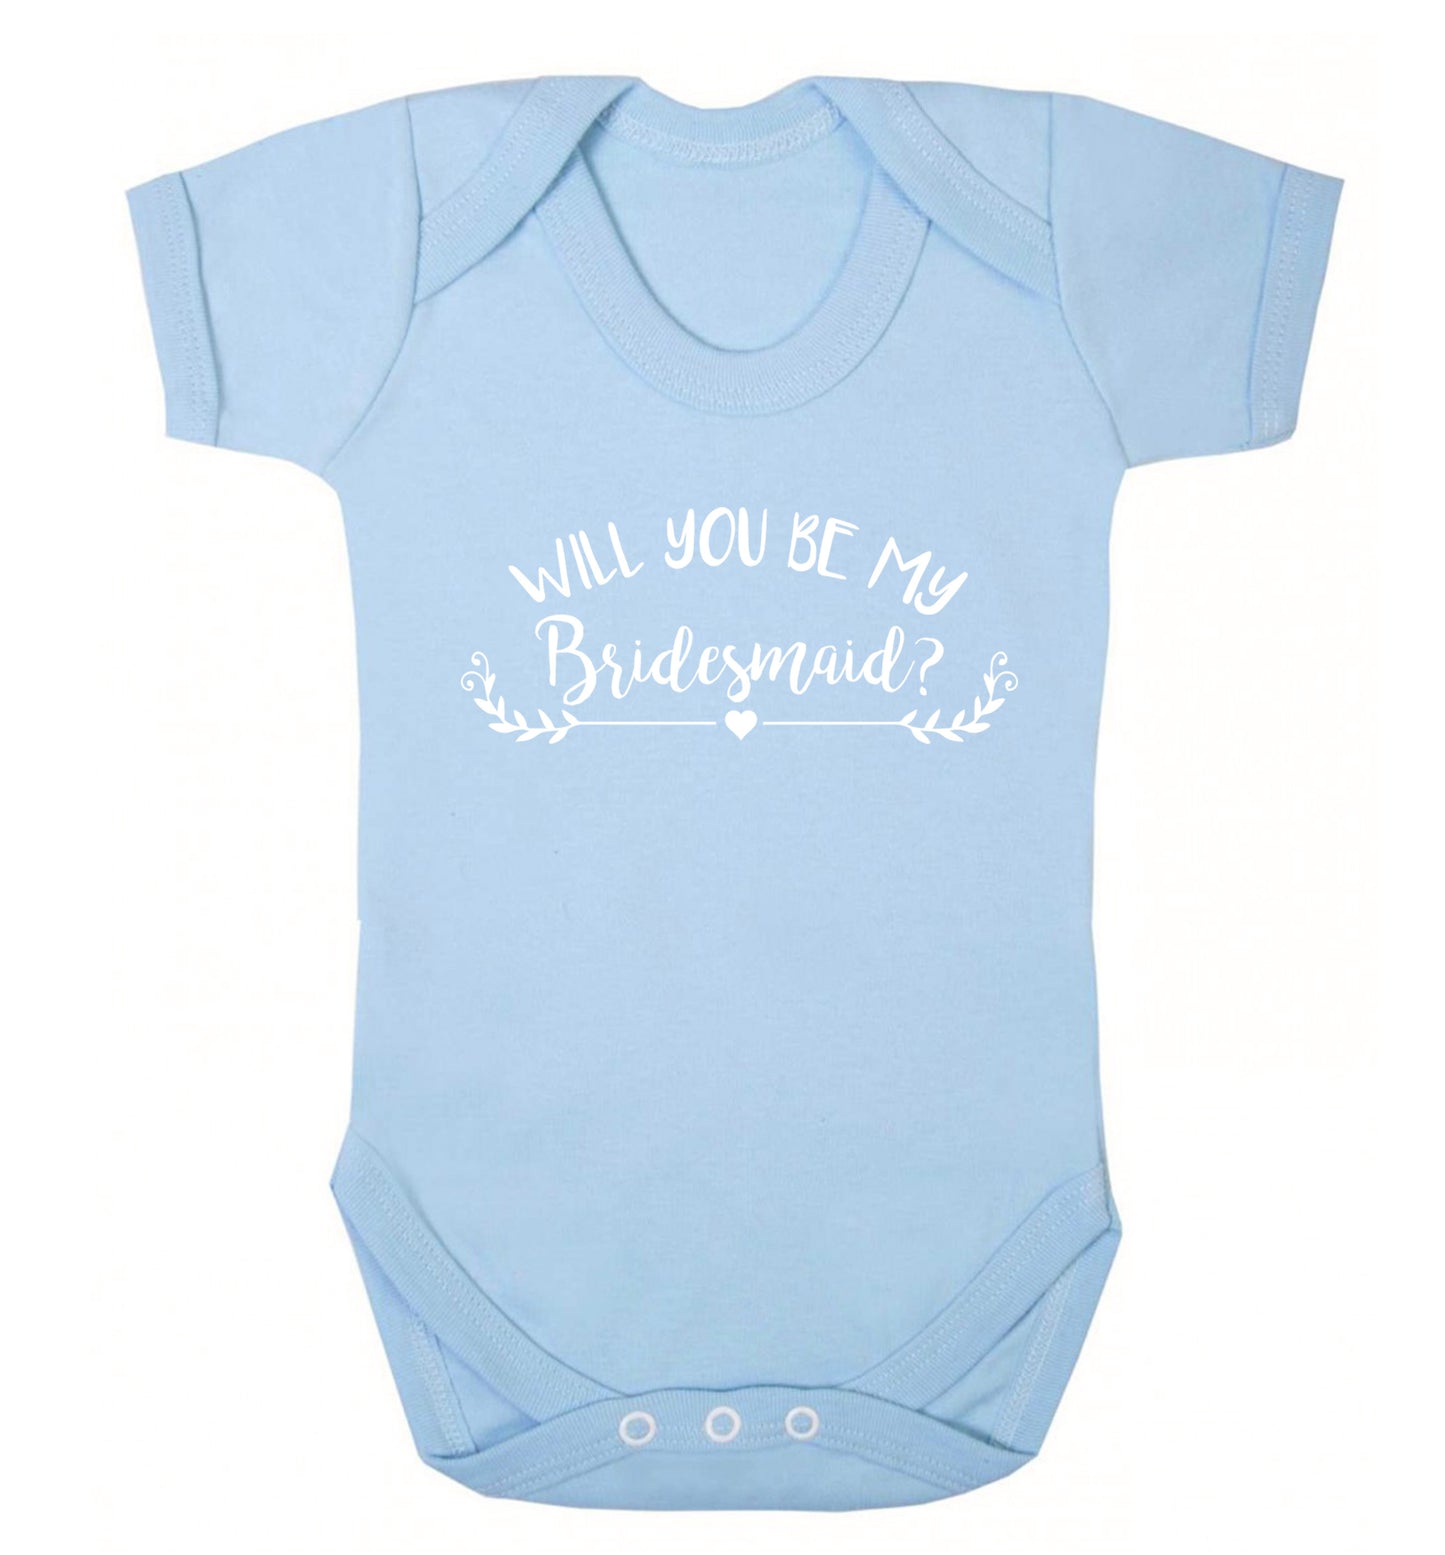 Will you be my bridesmaid? Baby Vest pale blue 18-24 months